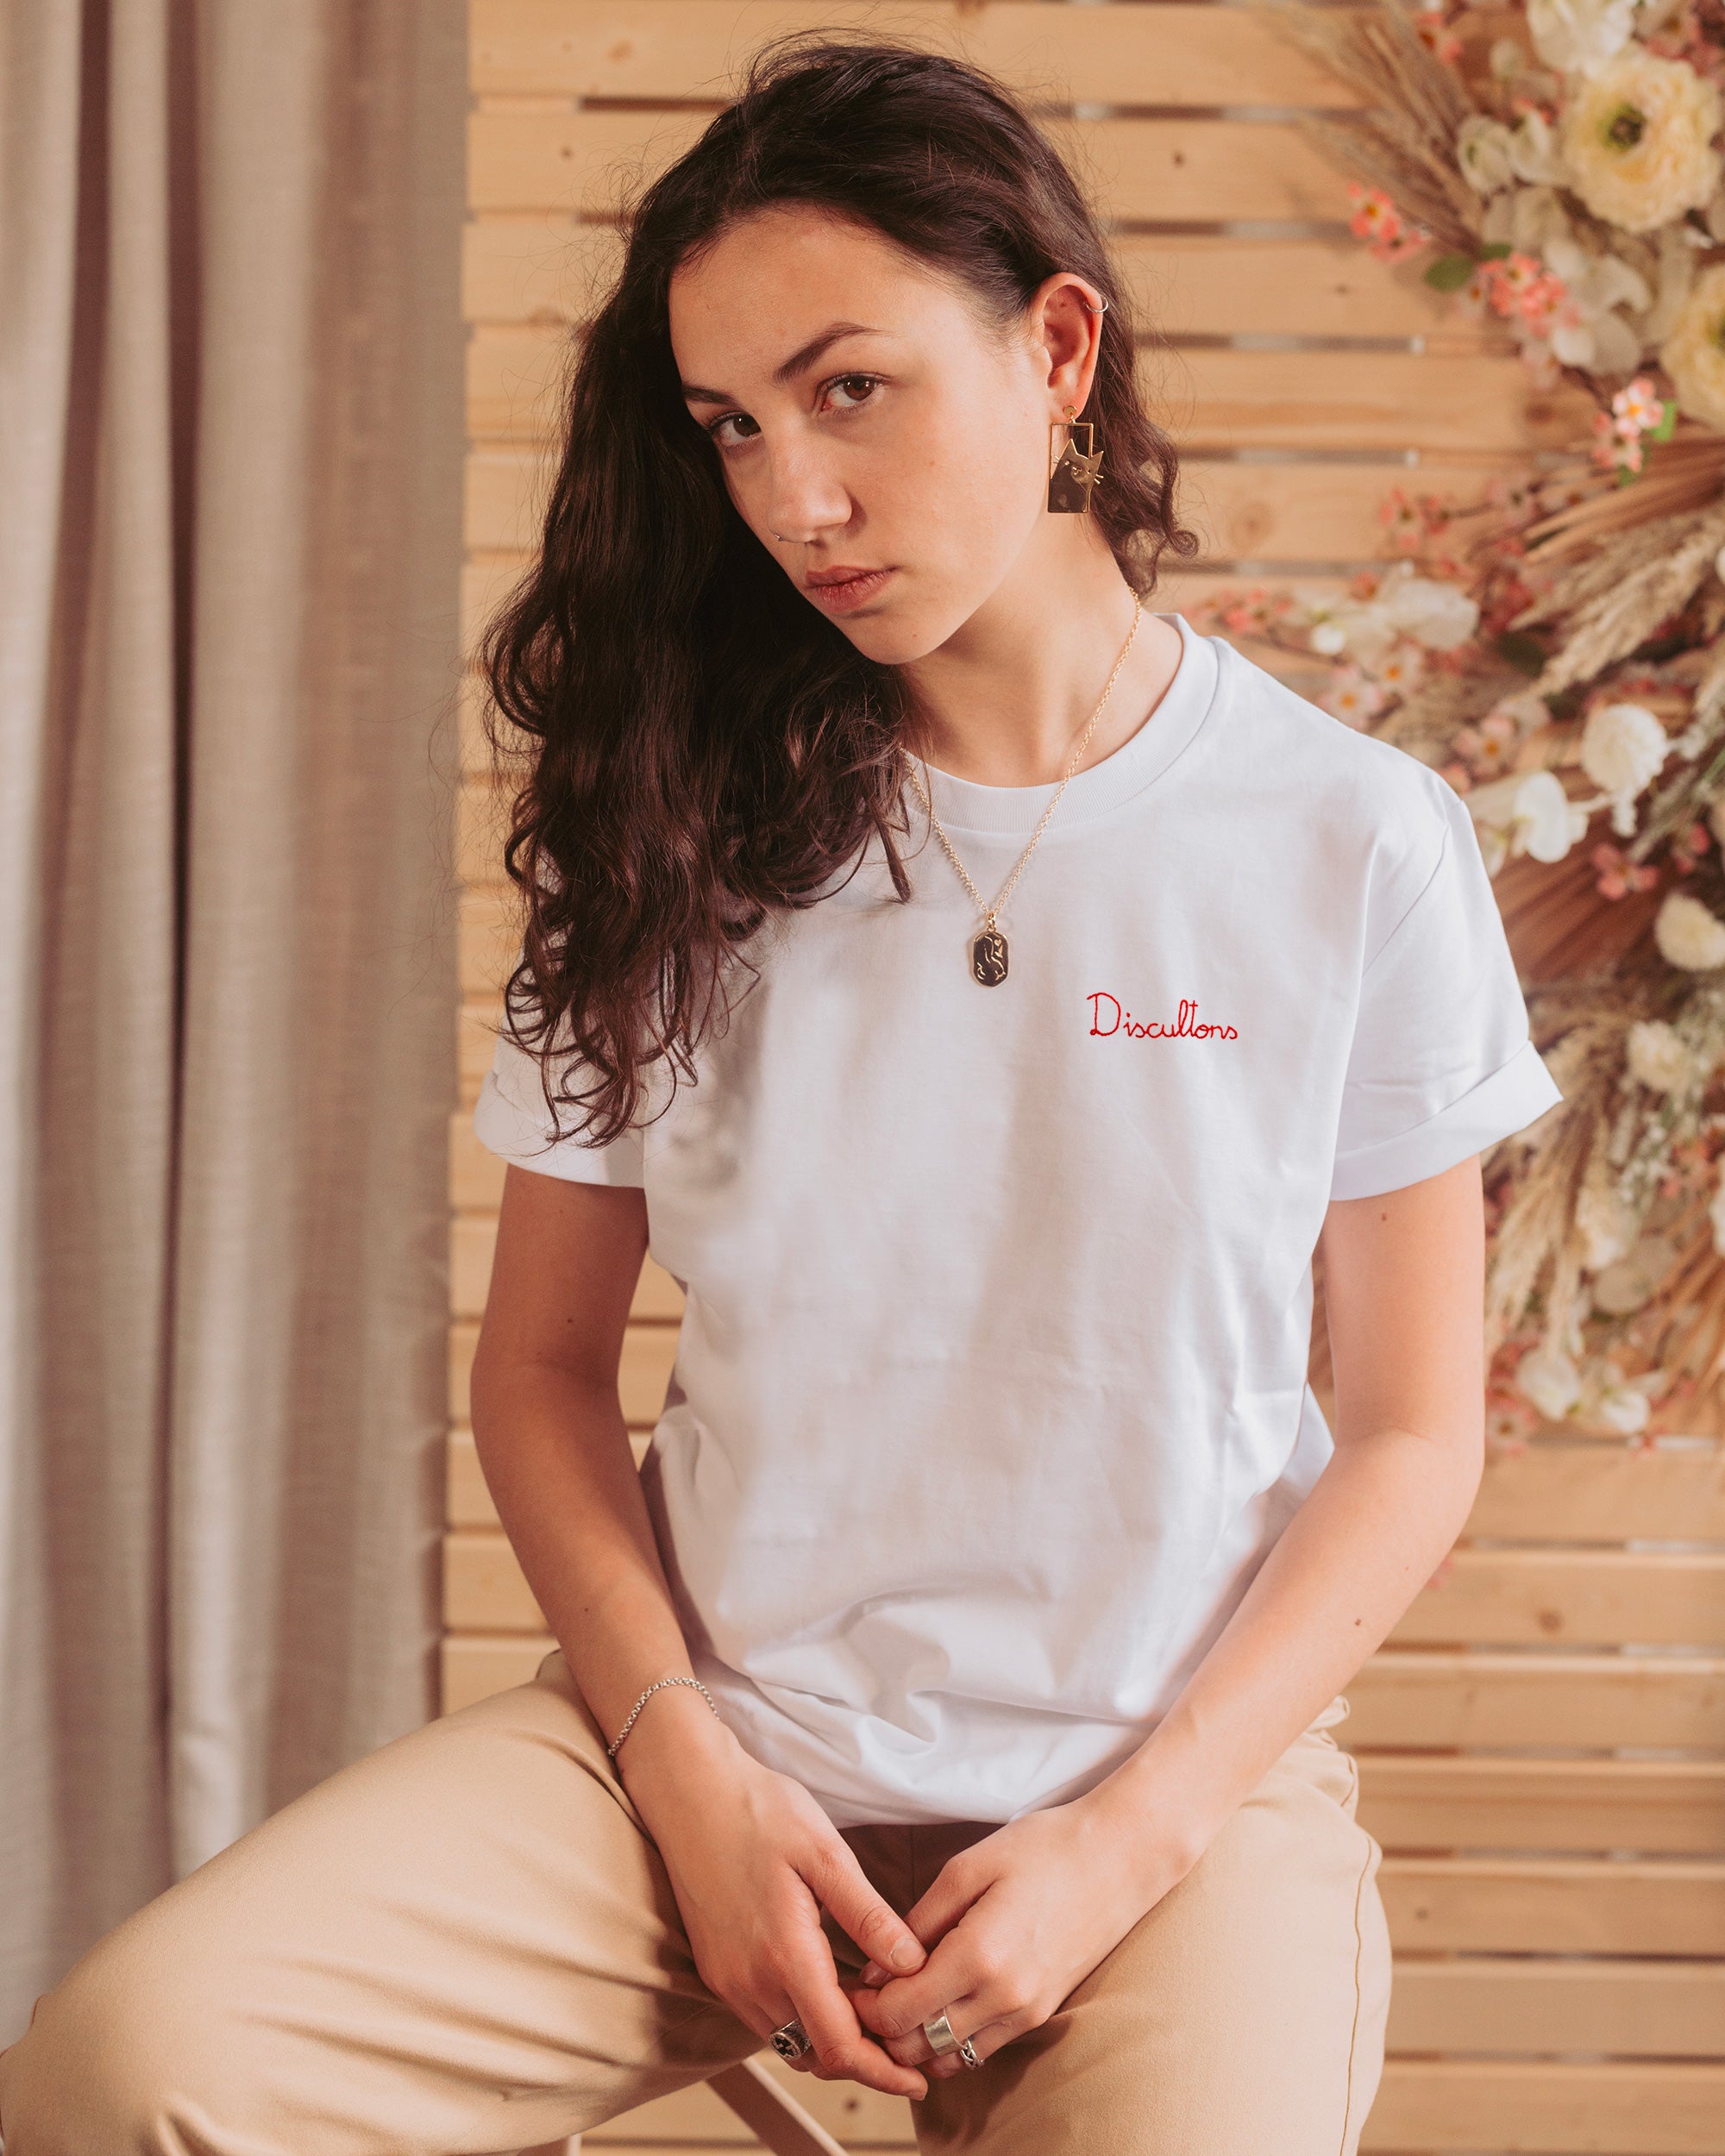 Woman in crisp white T-shirt, seated elegantly, showcasing 'Discultons' in vibrant red hand-embroidery.